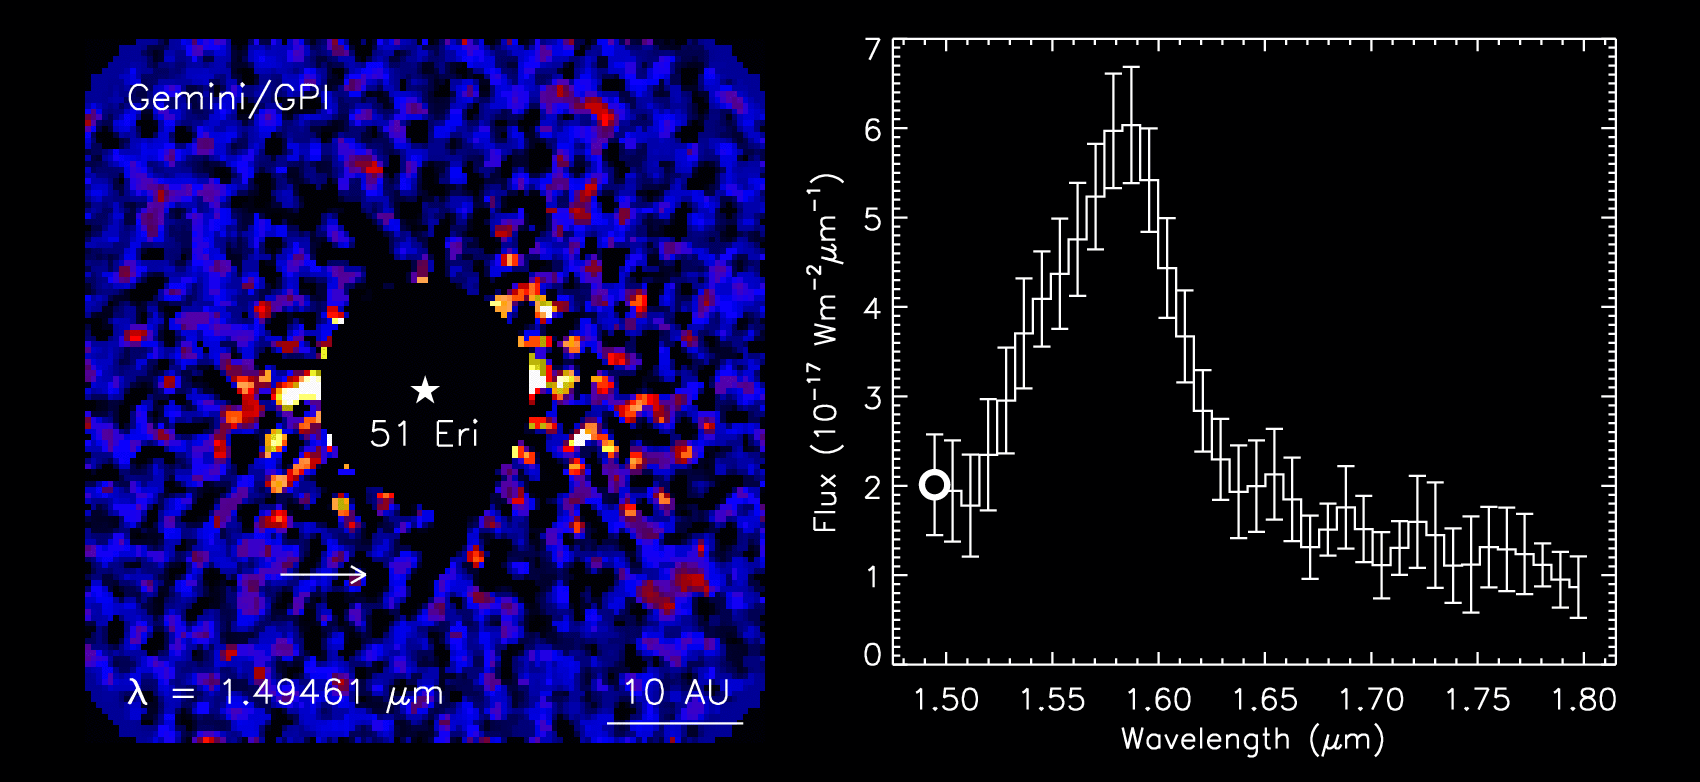 Animation: GPI images of 51 Eridani (left) reveal exoplanet & spectrum (right) shows its atmospheric composition.